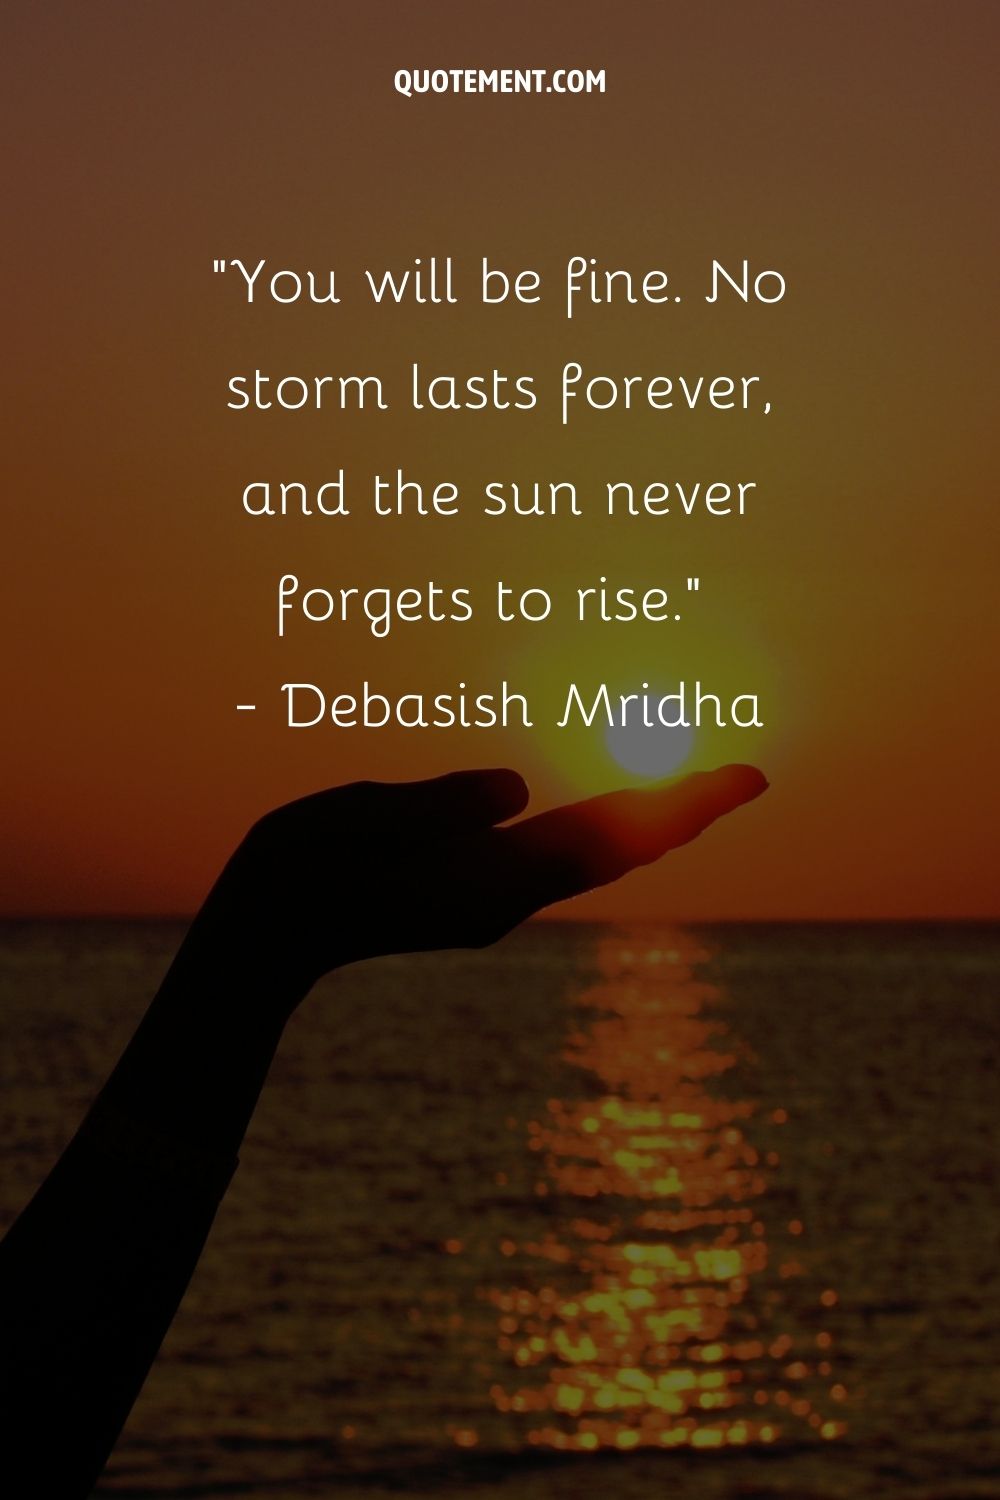 You will be fine. No storm lasts forever, and the sun never forgets to rise.